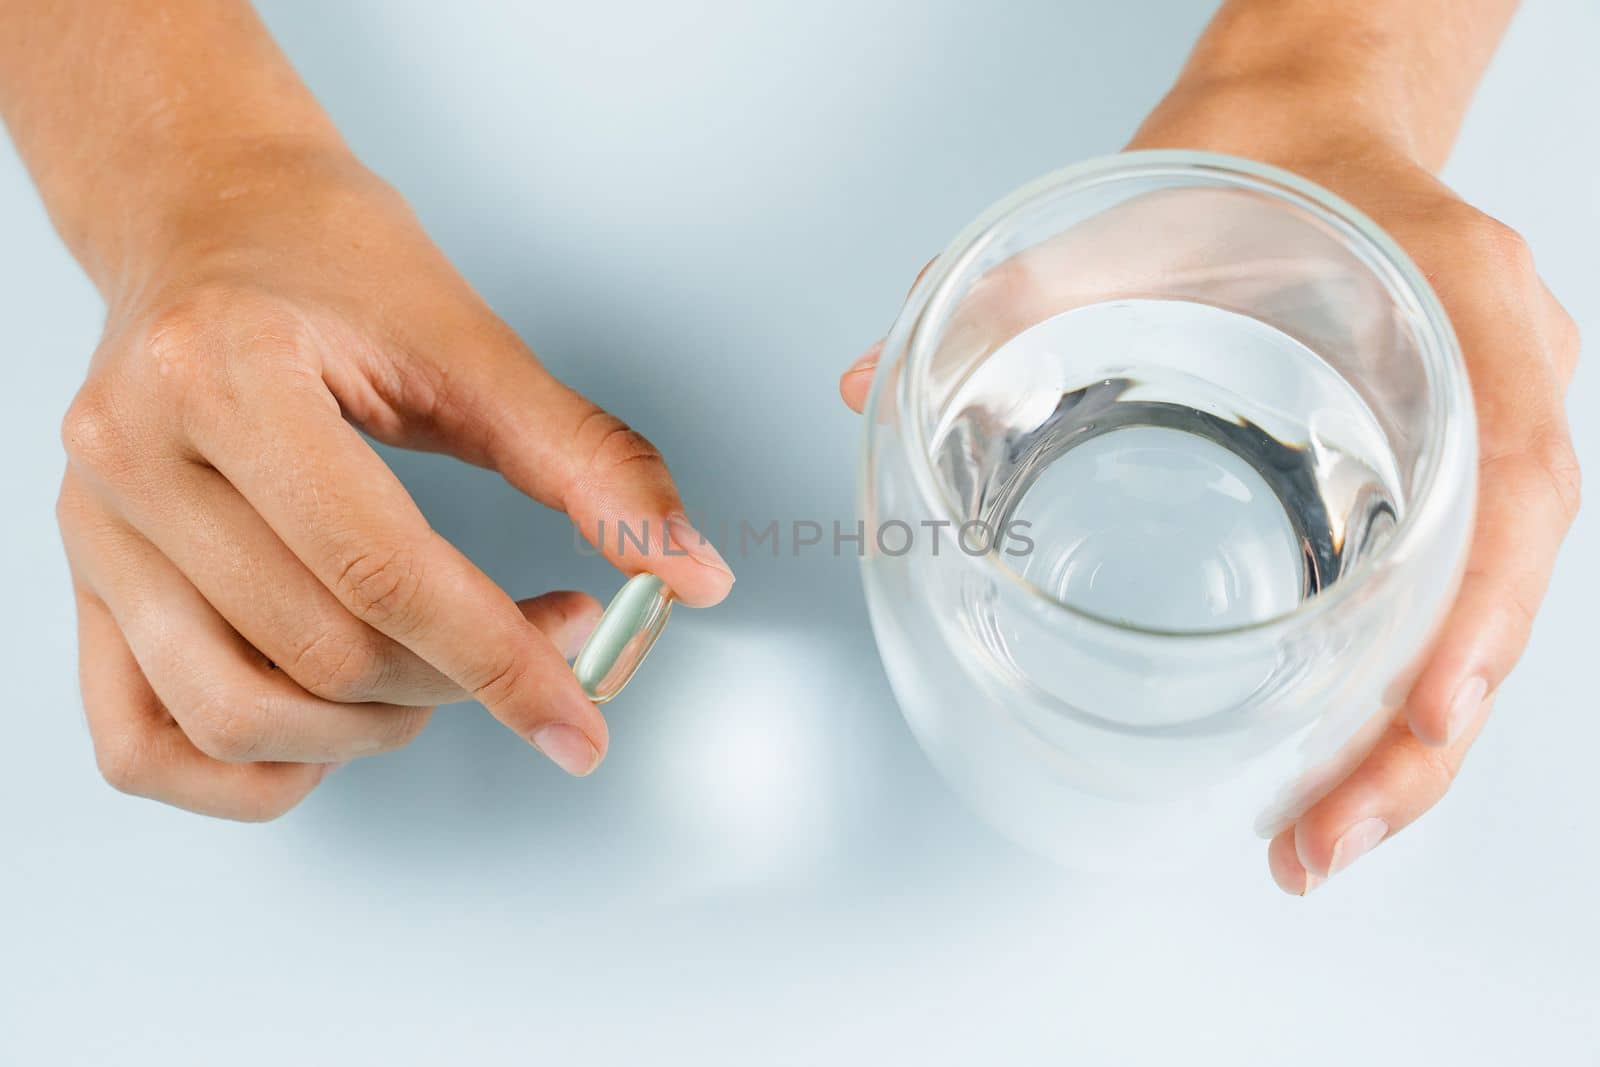 Omega 3 capsule of fish fat oil and cup of water in hands close-up. BADS pills of biologically active dietary supplements. Vitamin D for building and maintaining healthy bones